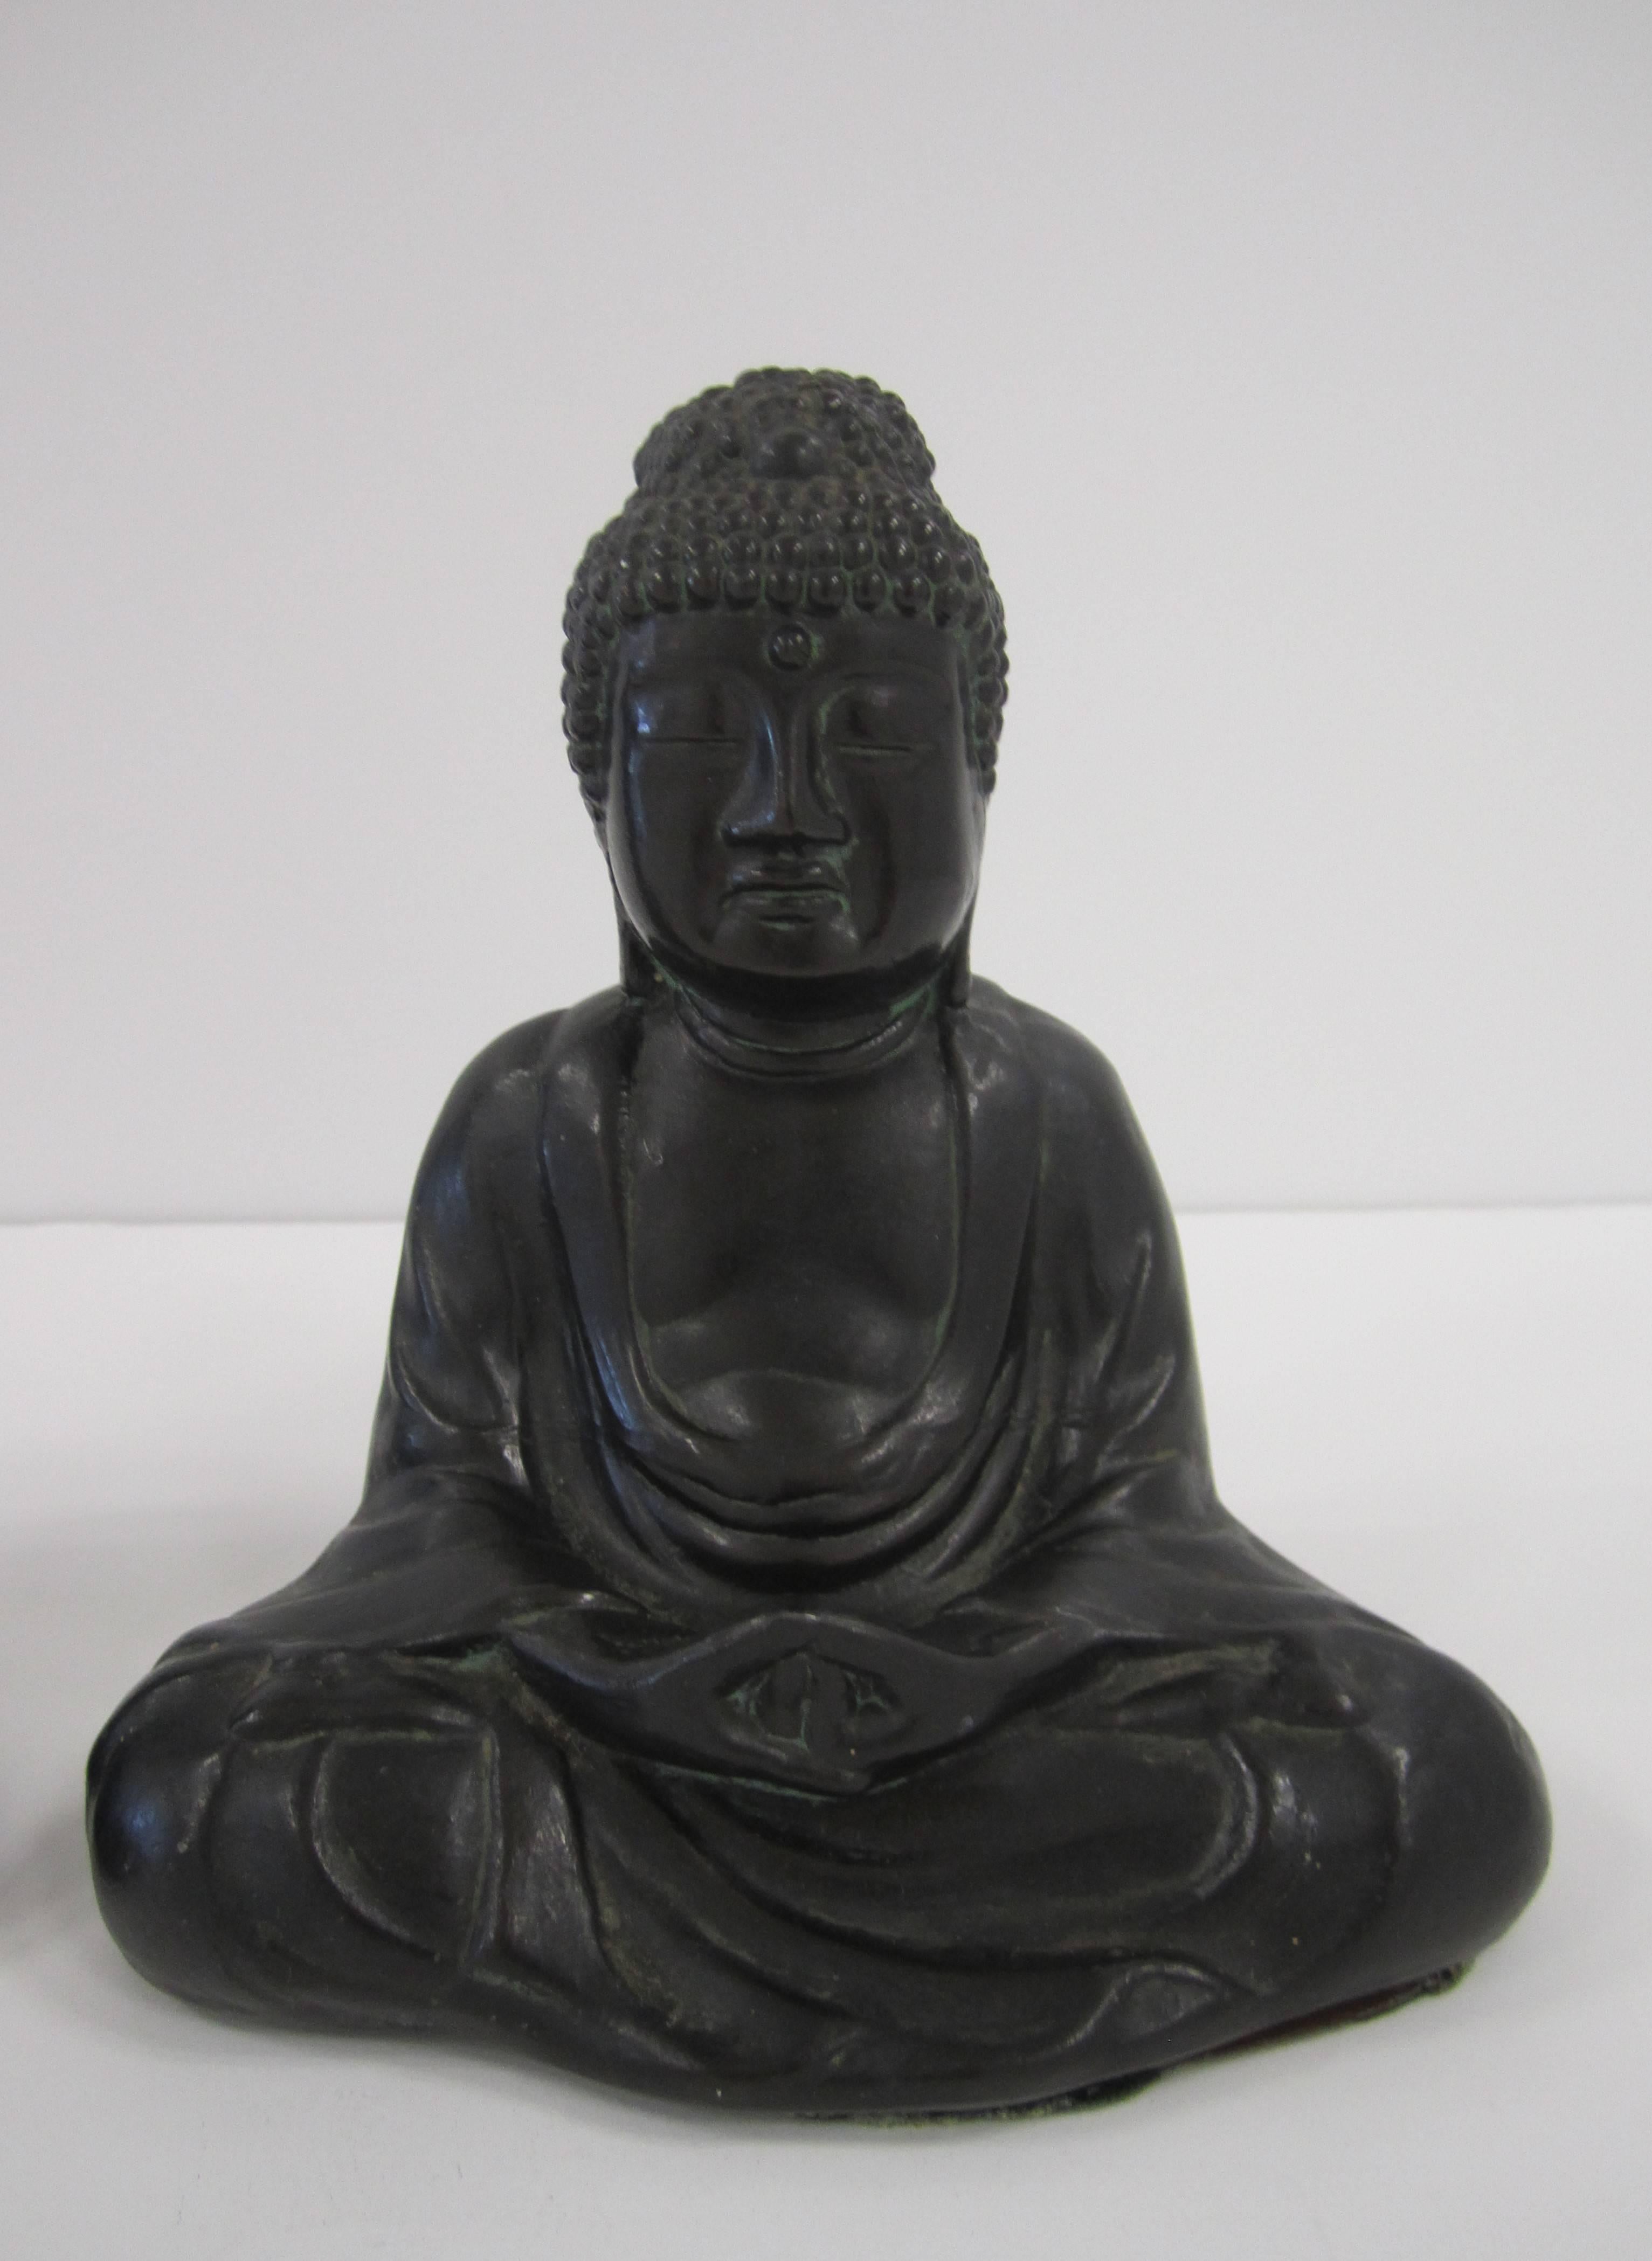 A special pair of Buddha bookend sculptures in prayer position, in an ebonized metal. With maker's mark on side, 